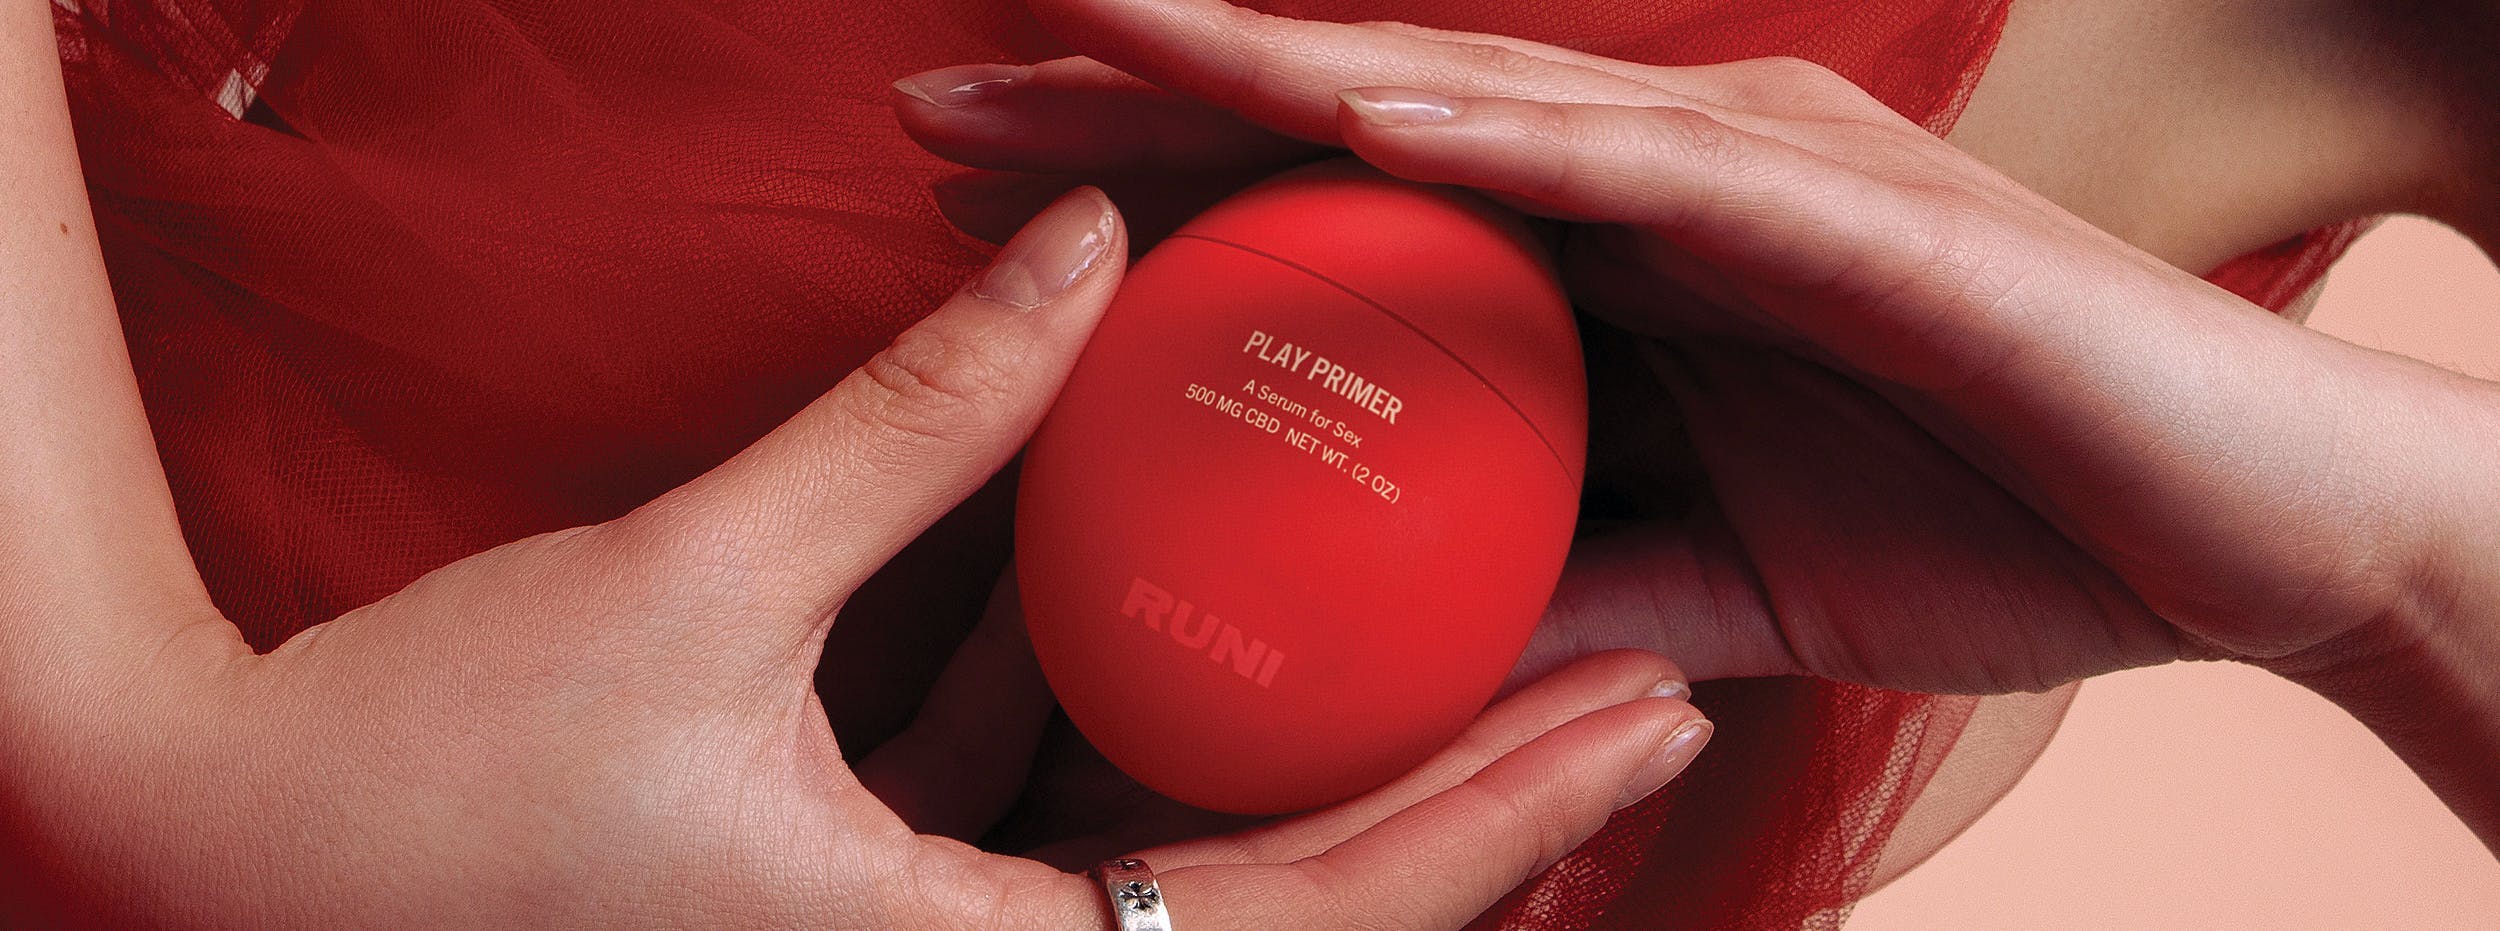 Featured Image for Runi Brand Identity and Packaging Design